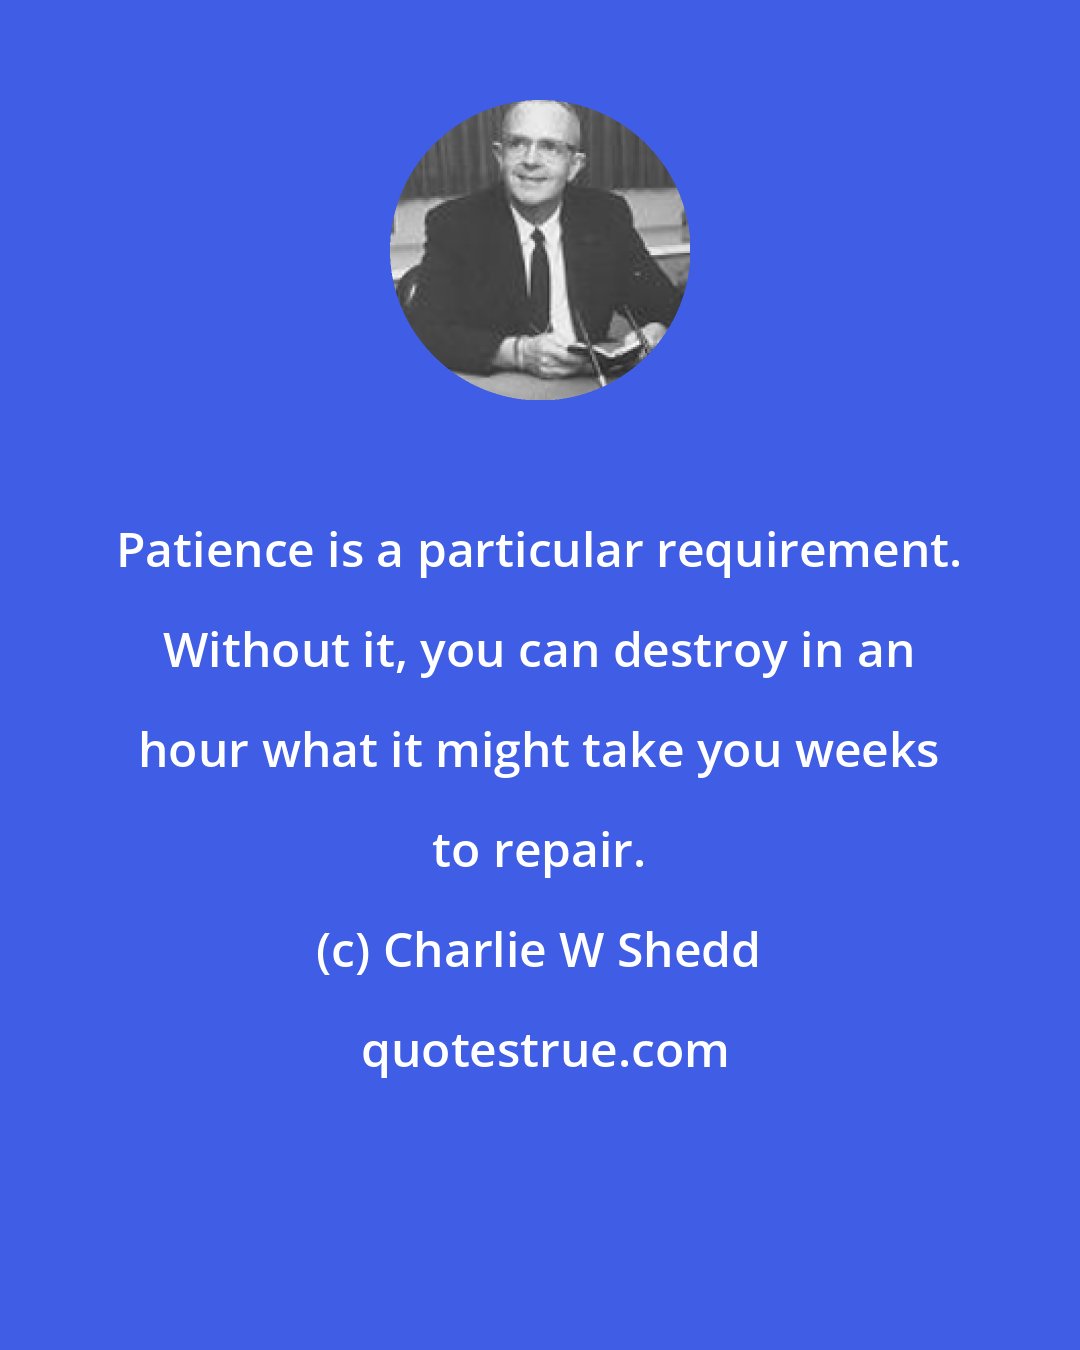 Charlie W Shedd: Patience is a particular requirement. Without it, you can destroy in an hour what it might take you weeks to repair.